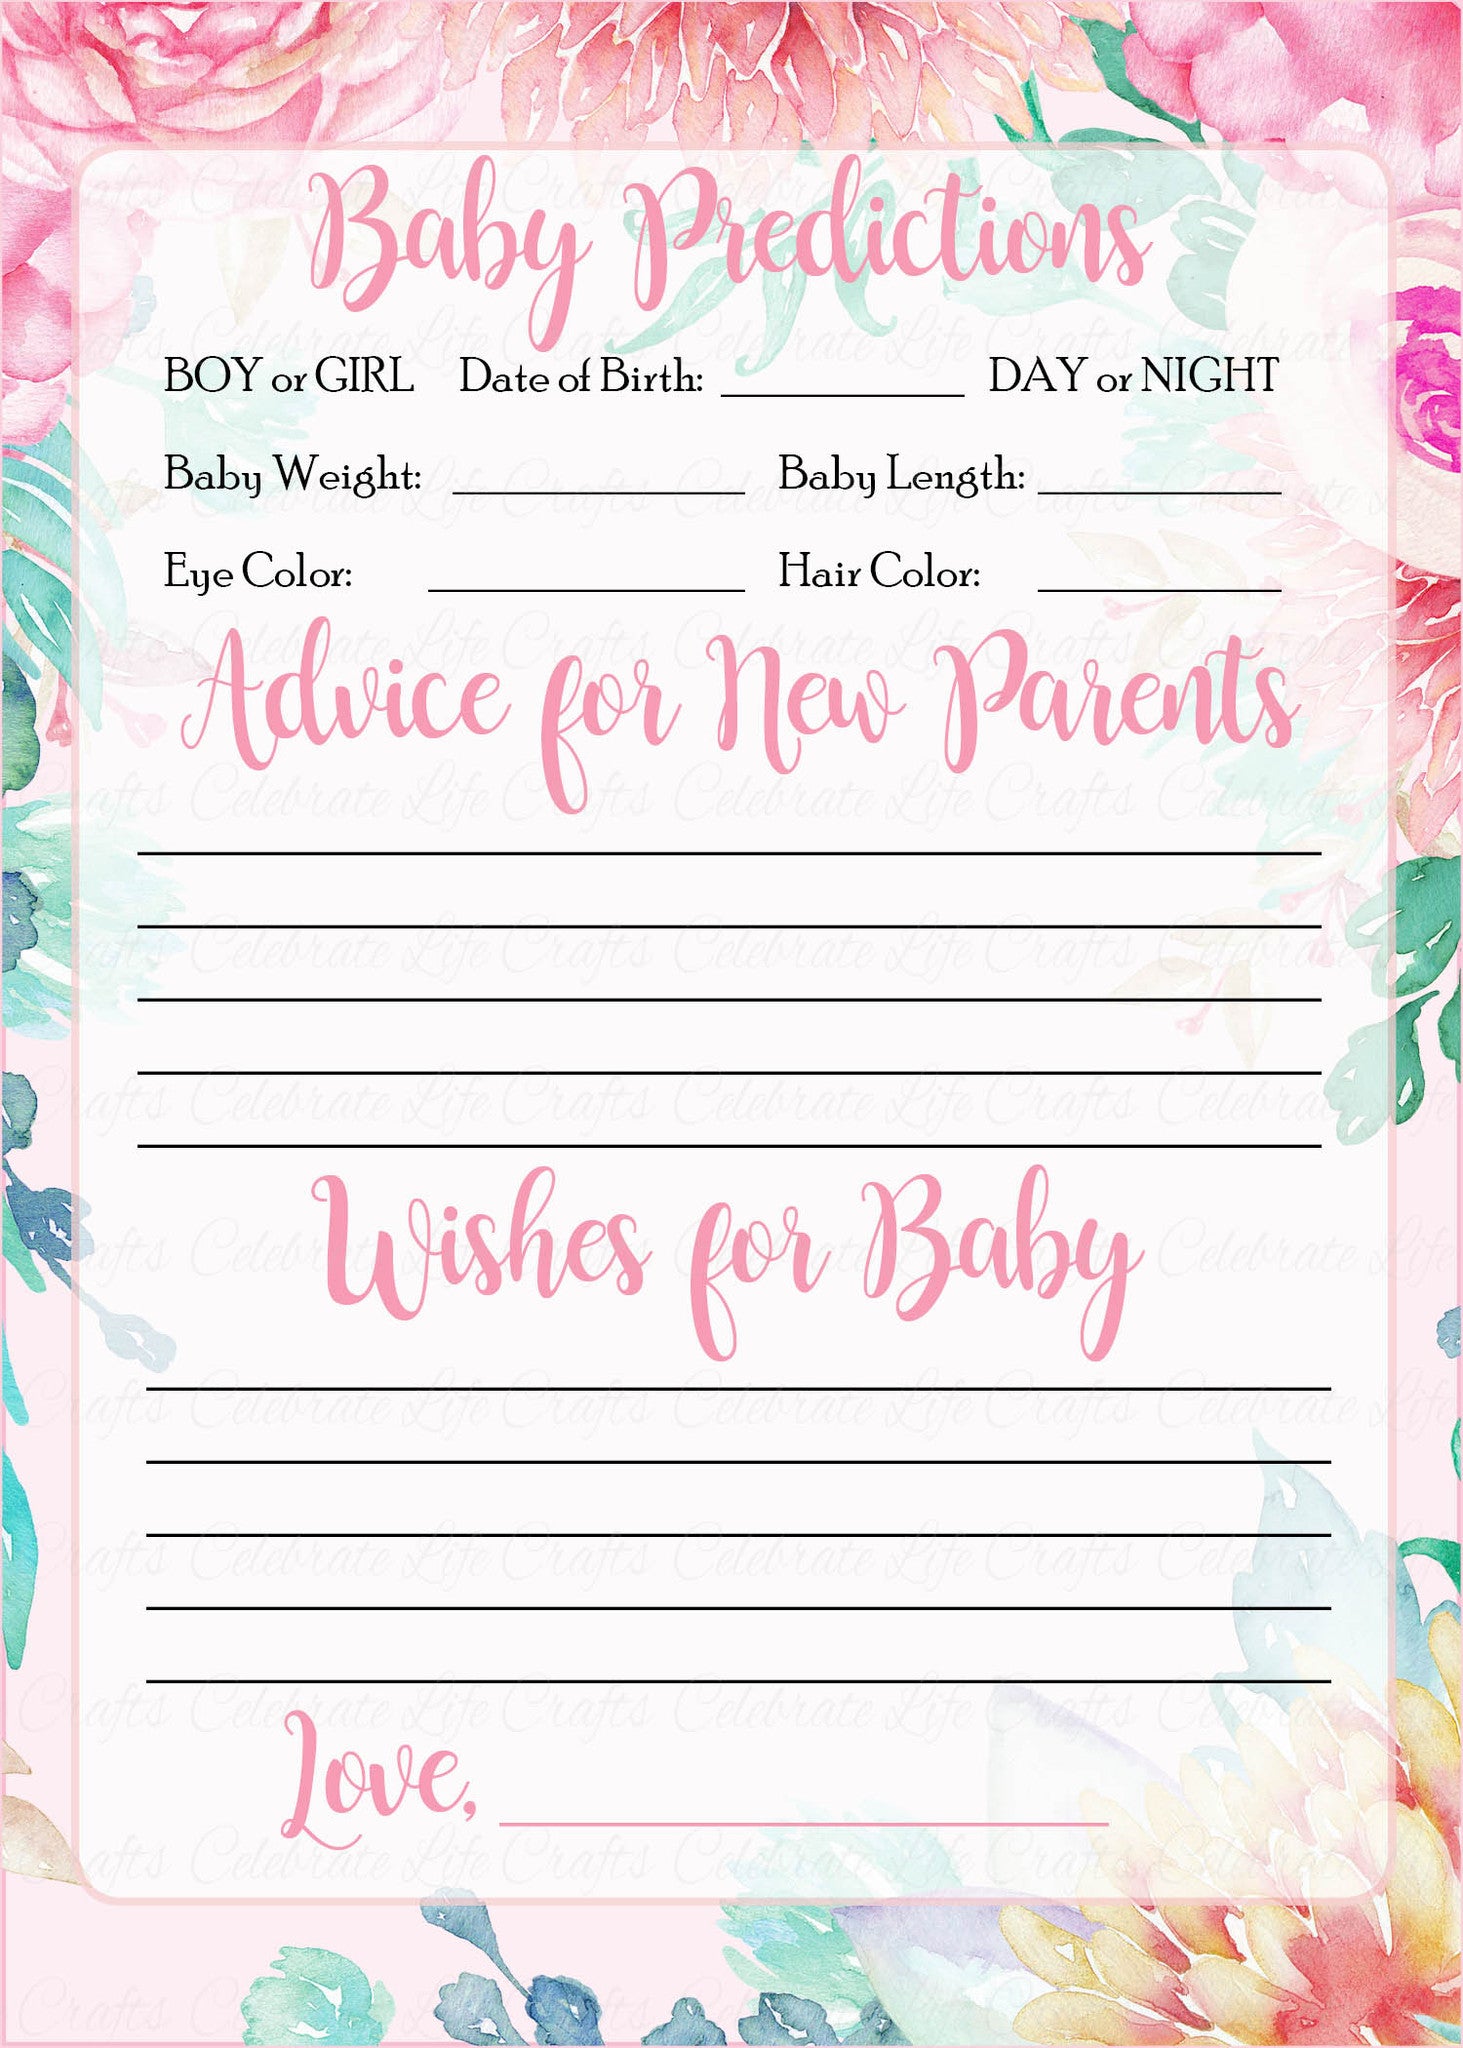 Cards For Baby Showers - Home Sweet Home | Modern Livingroom